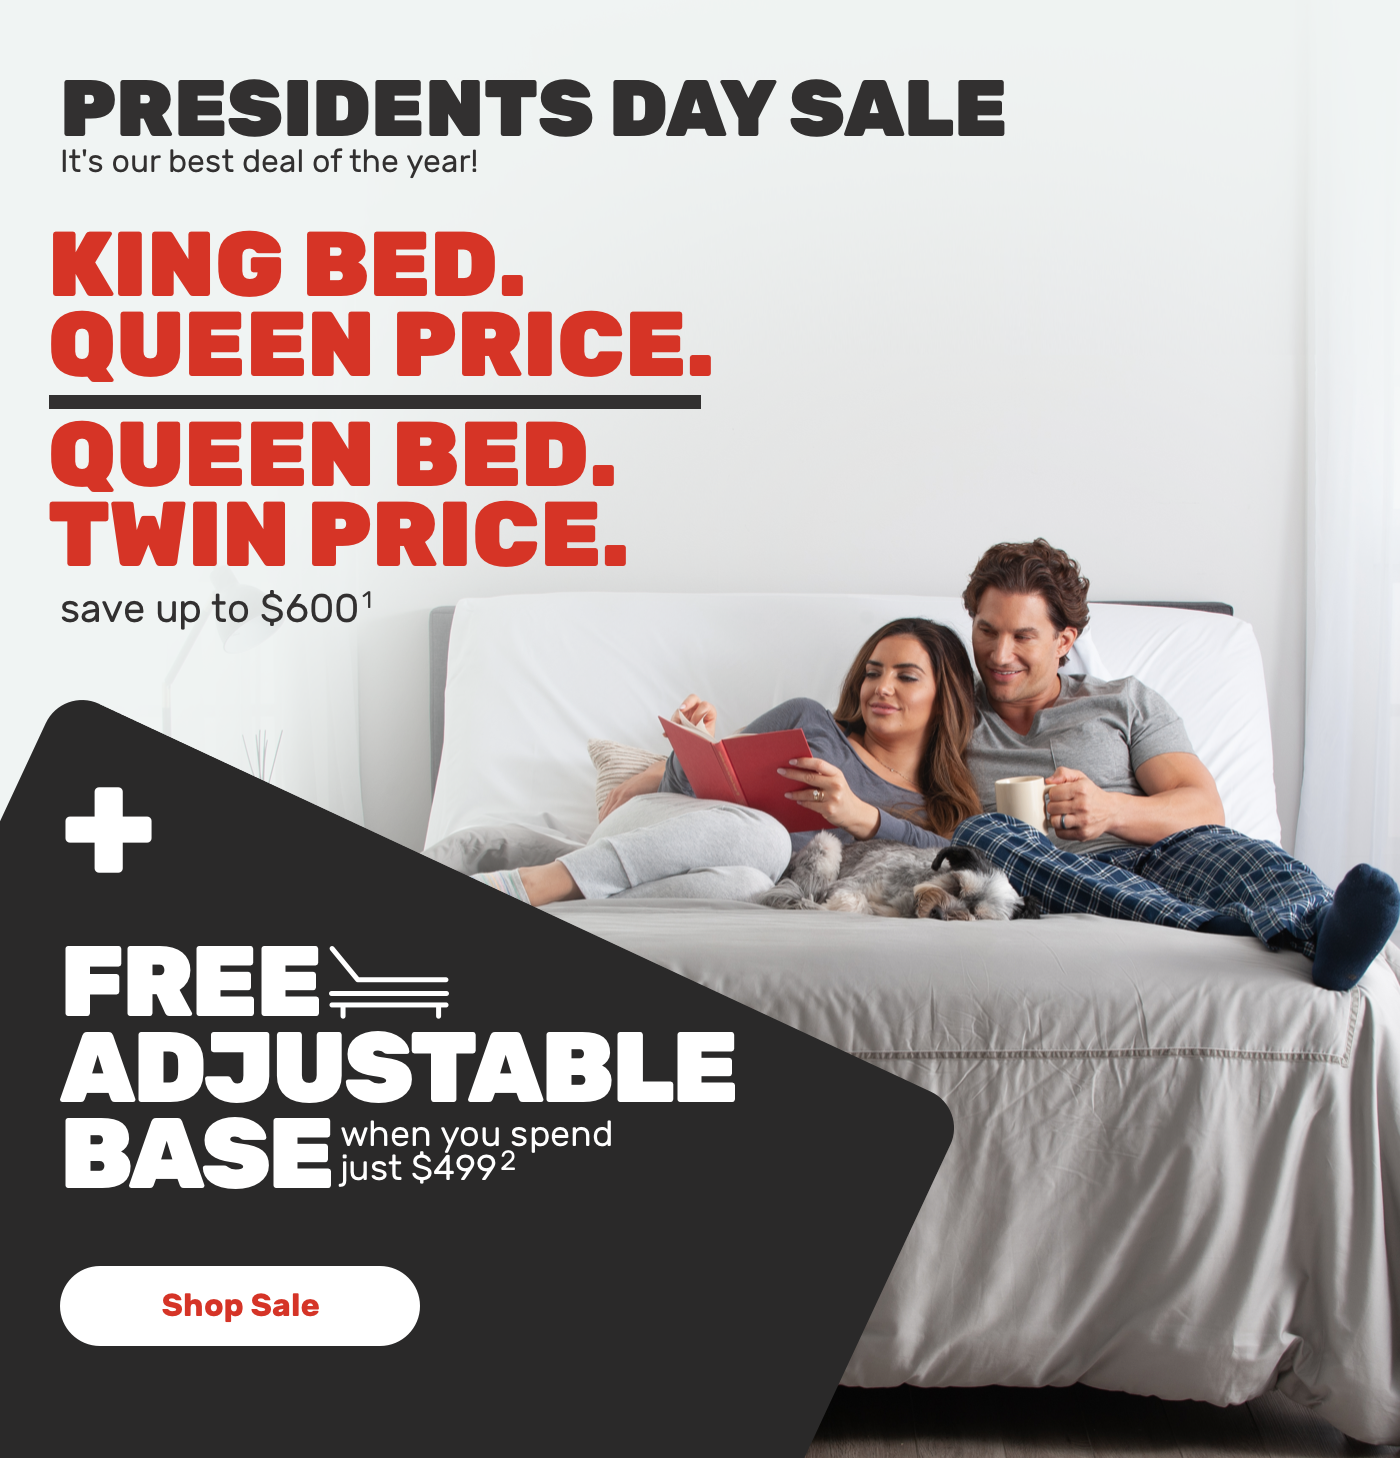 Presidents Day Sale. It's our best deal of the year. Shop Sale.